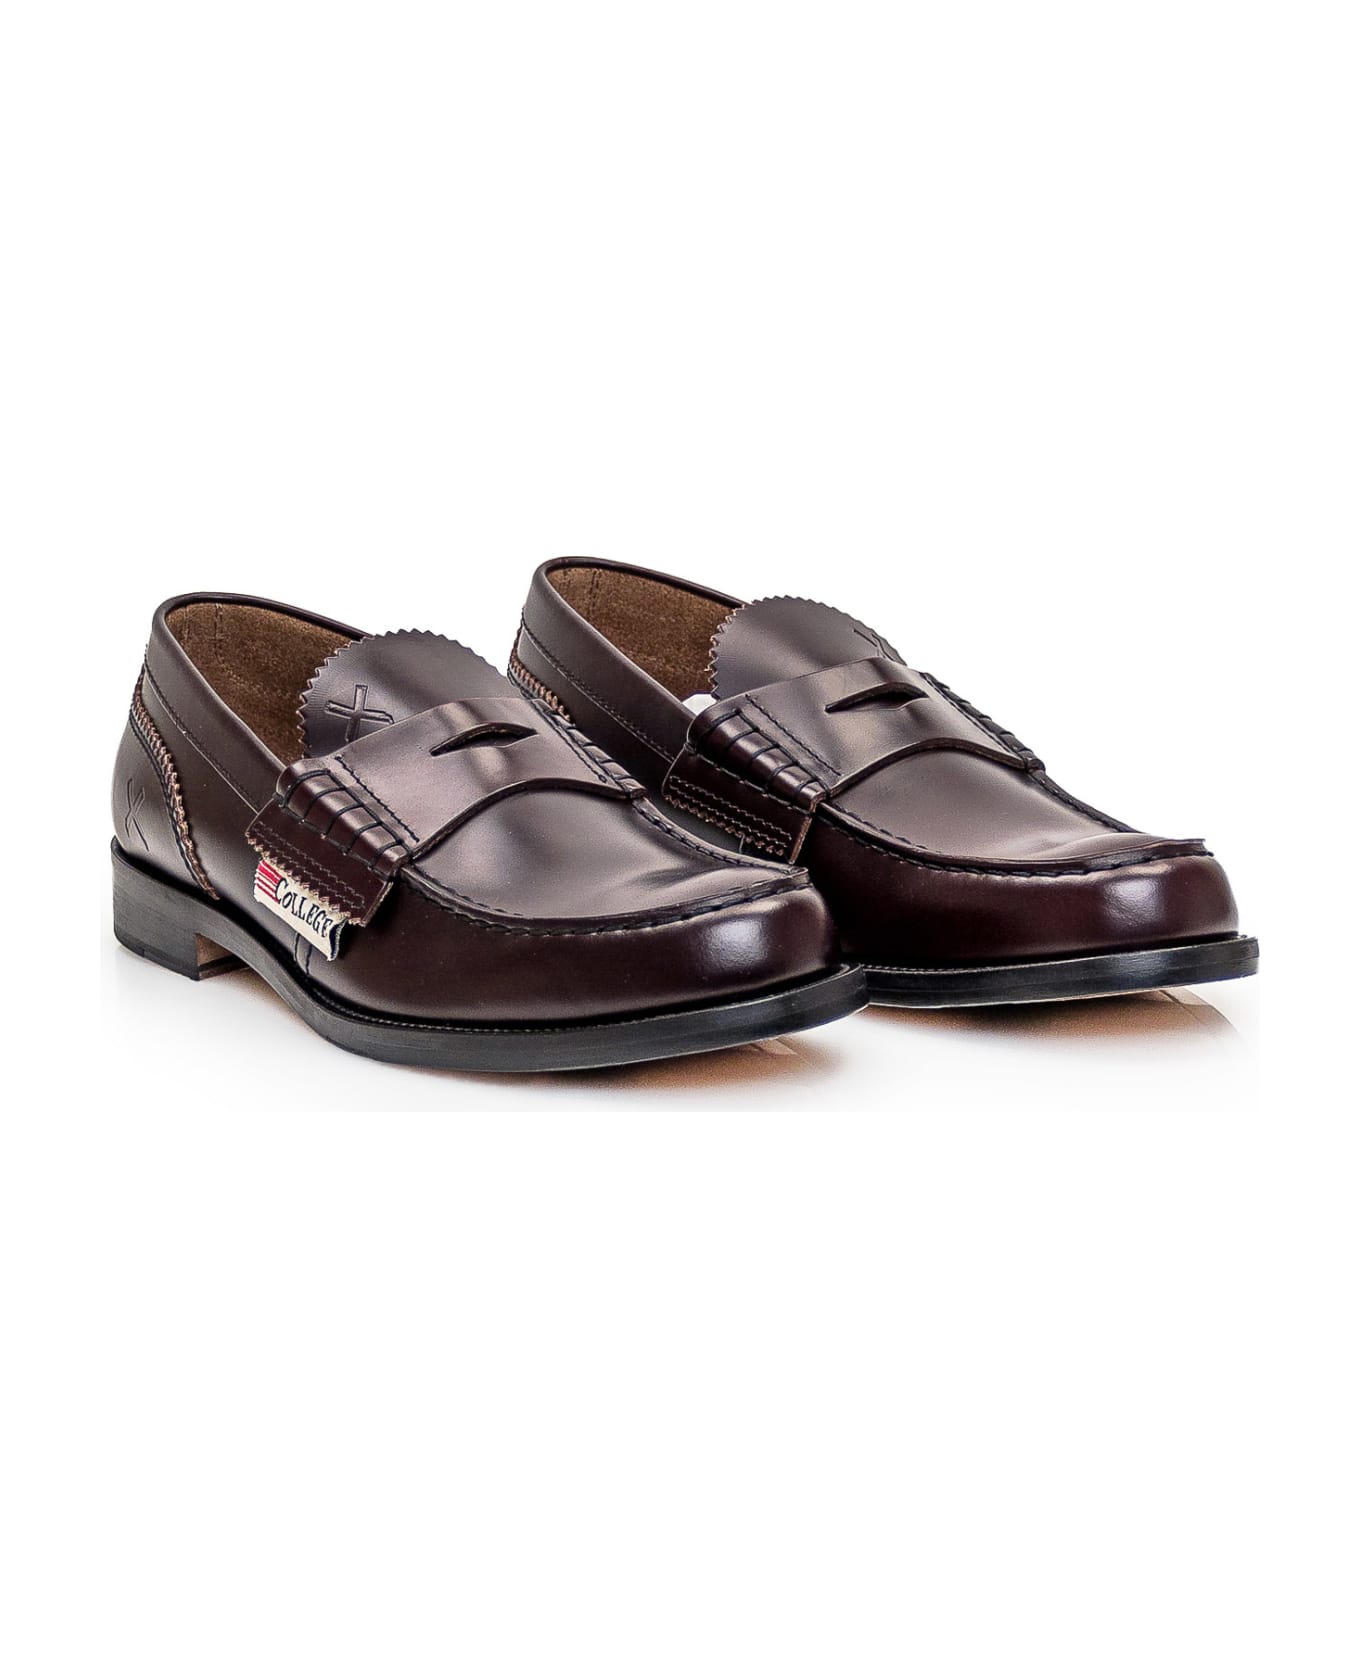 College Leather Loafer - ANTICK CORDOBAN